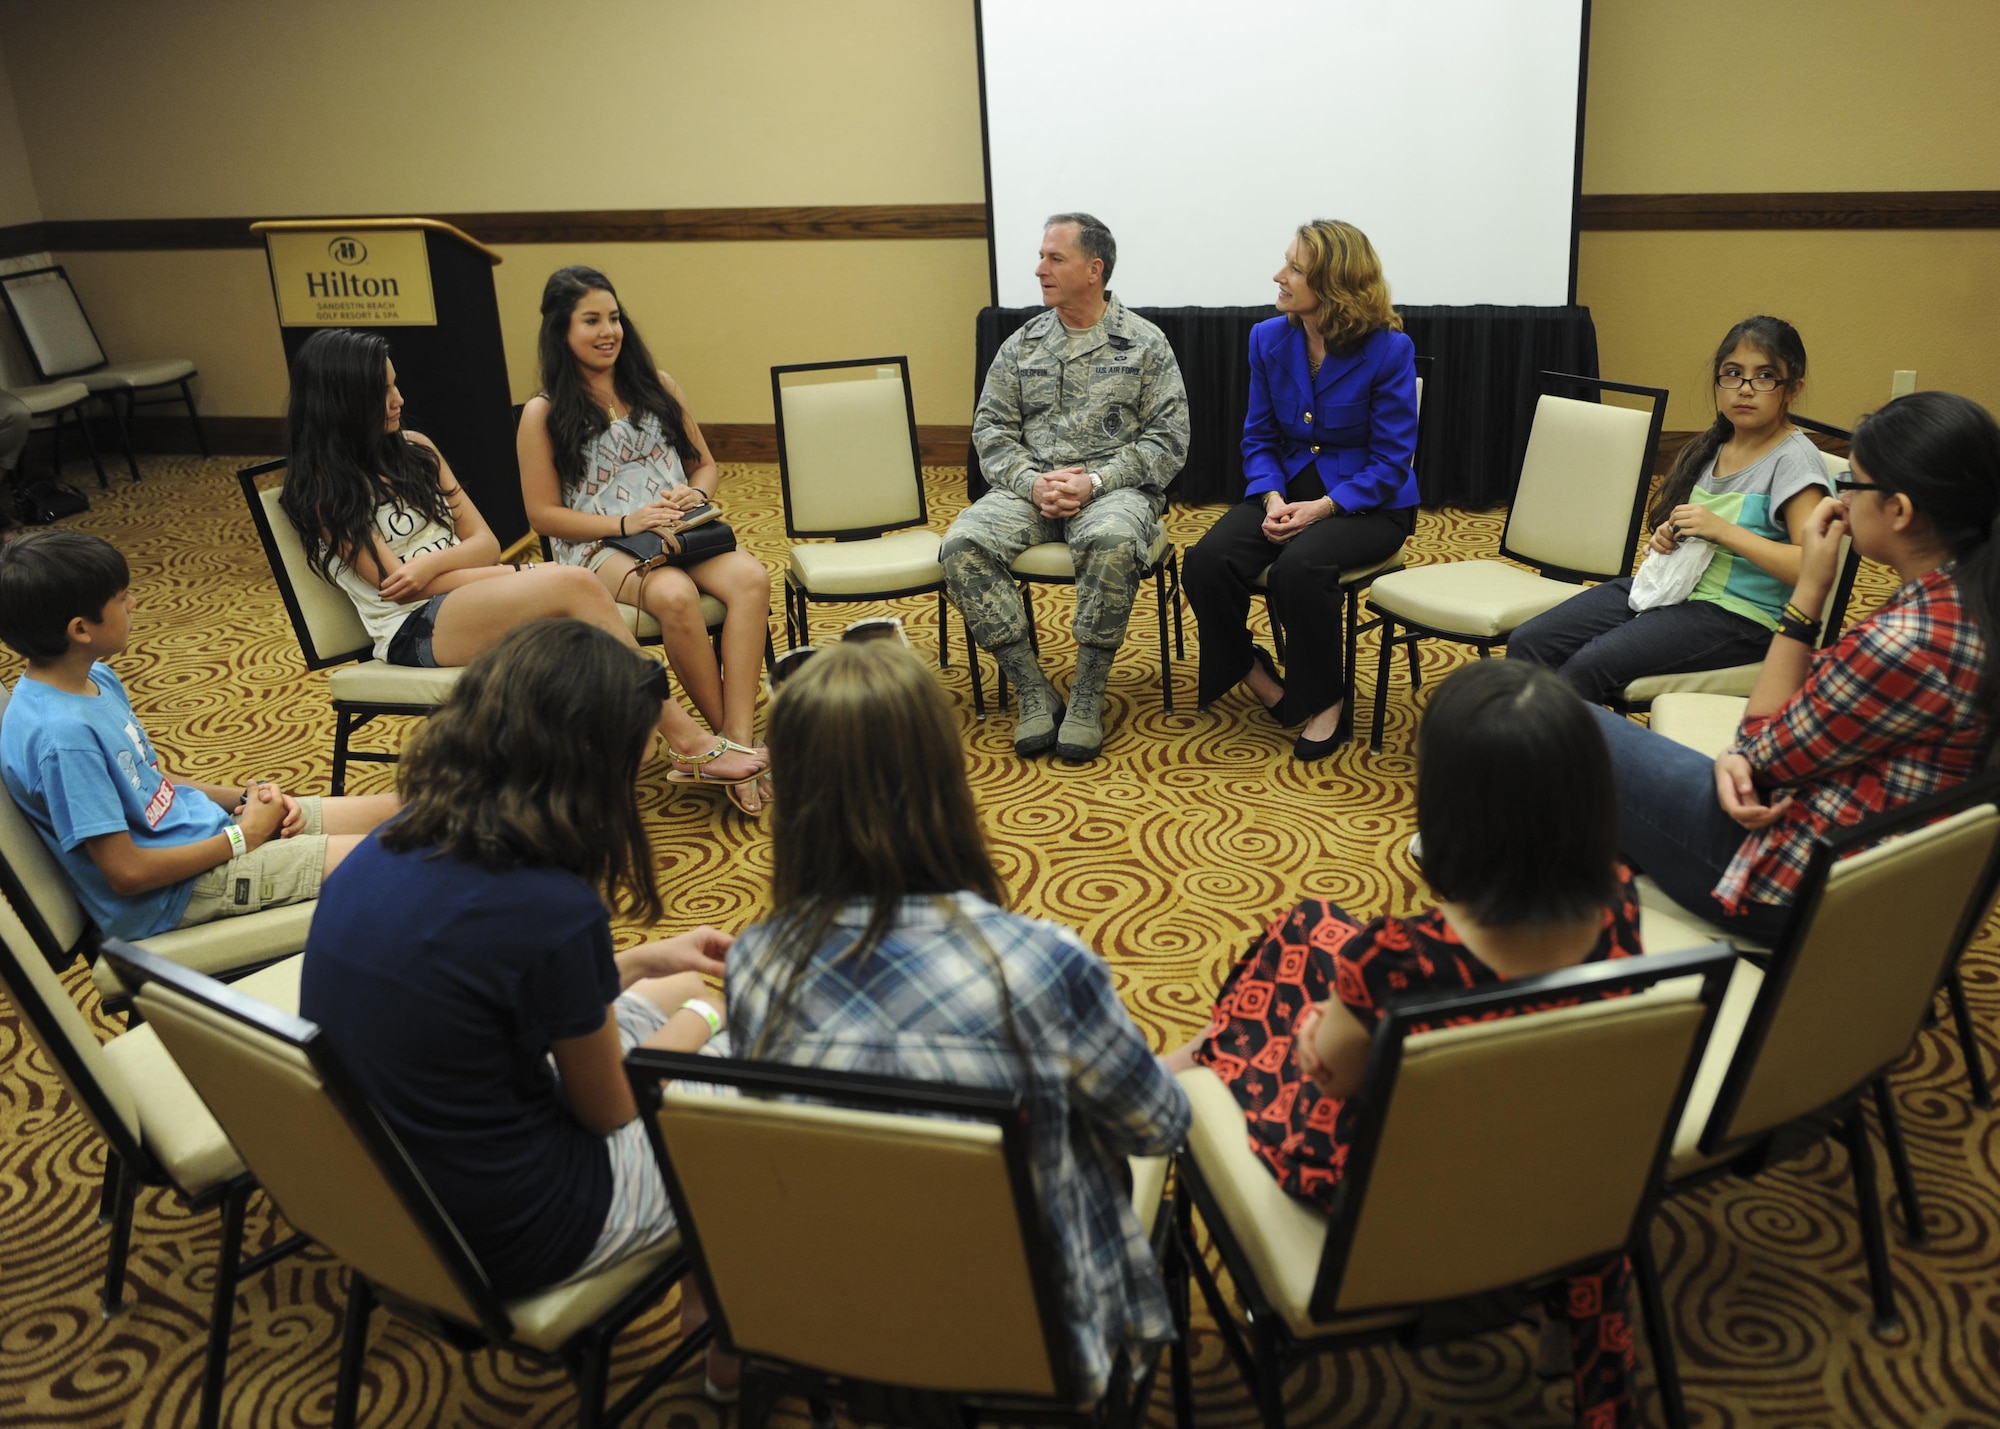 Gen. David Goldfein, Air Force vice chief of staff, and Lisa Disbrow, undersecretary of the Air Force, speak to the children of wounded, injured and ill members during the AFSOC Warrior C.A.R.E. Summit at the Hilton Sandestin Beach Golf Resort & Spa April 26, 2016. During the summit, Goldfein and Disbrow announced their plan for an Airman for life program, which will take care of wounded, injured and ill members after they leave the service. (U.S. Air Force photo by Senior Airman Meagan Schutter) 